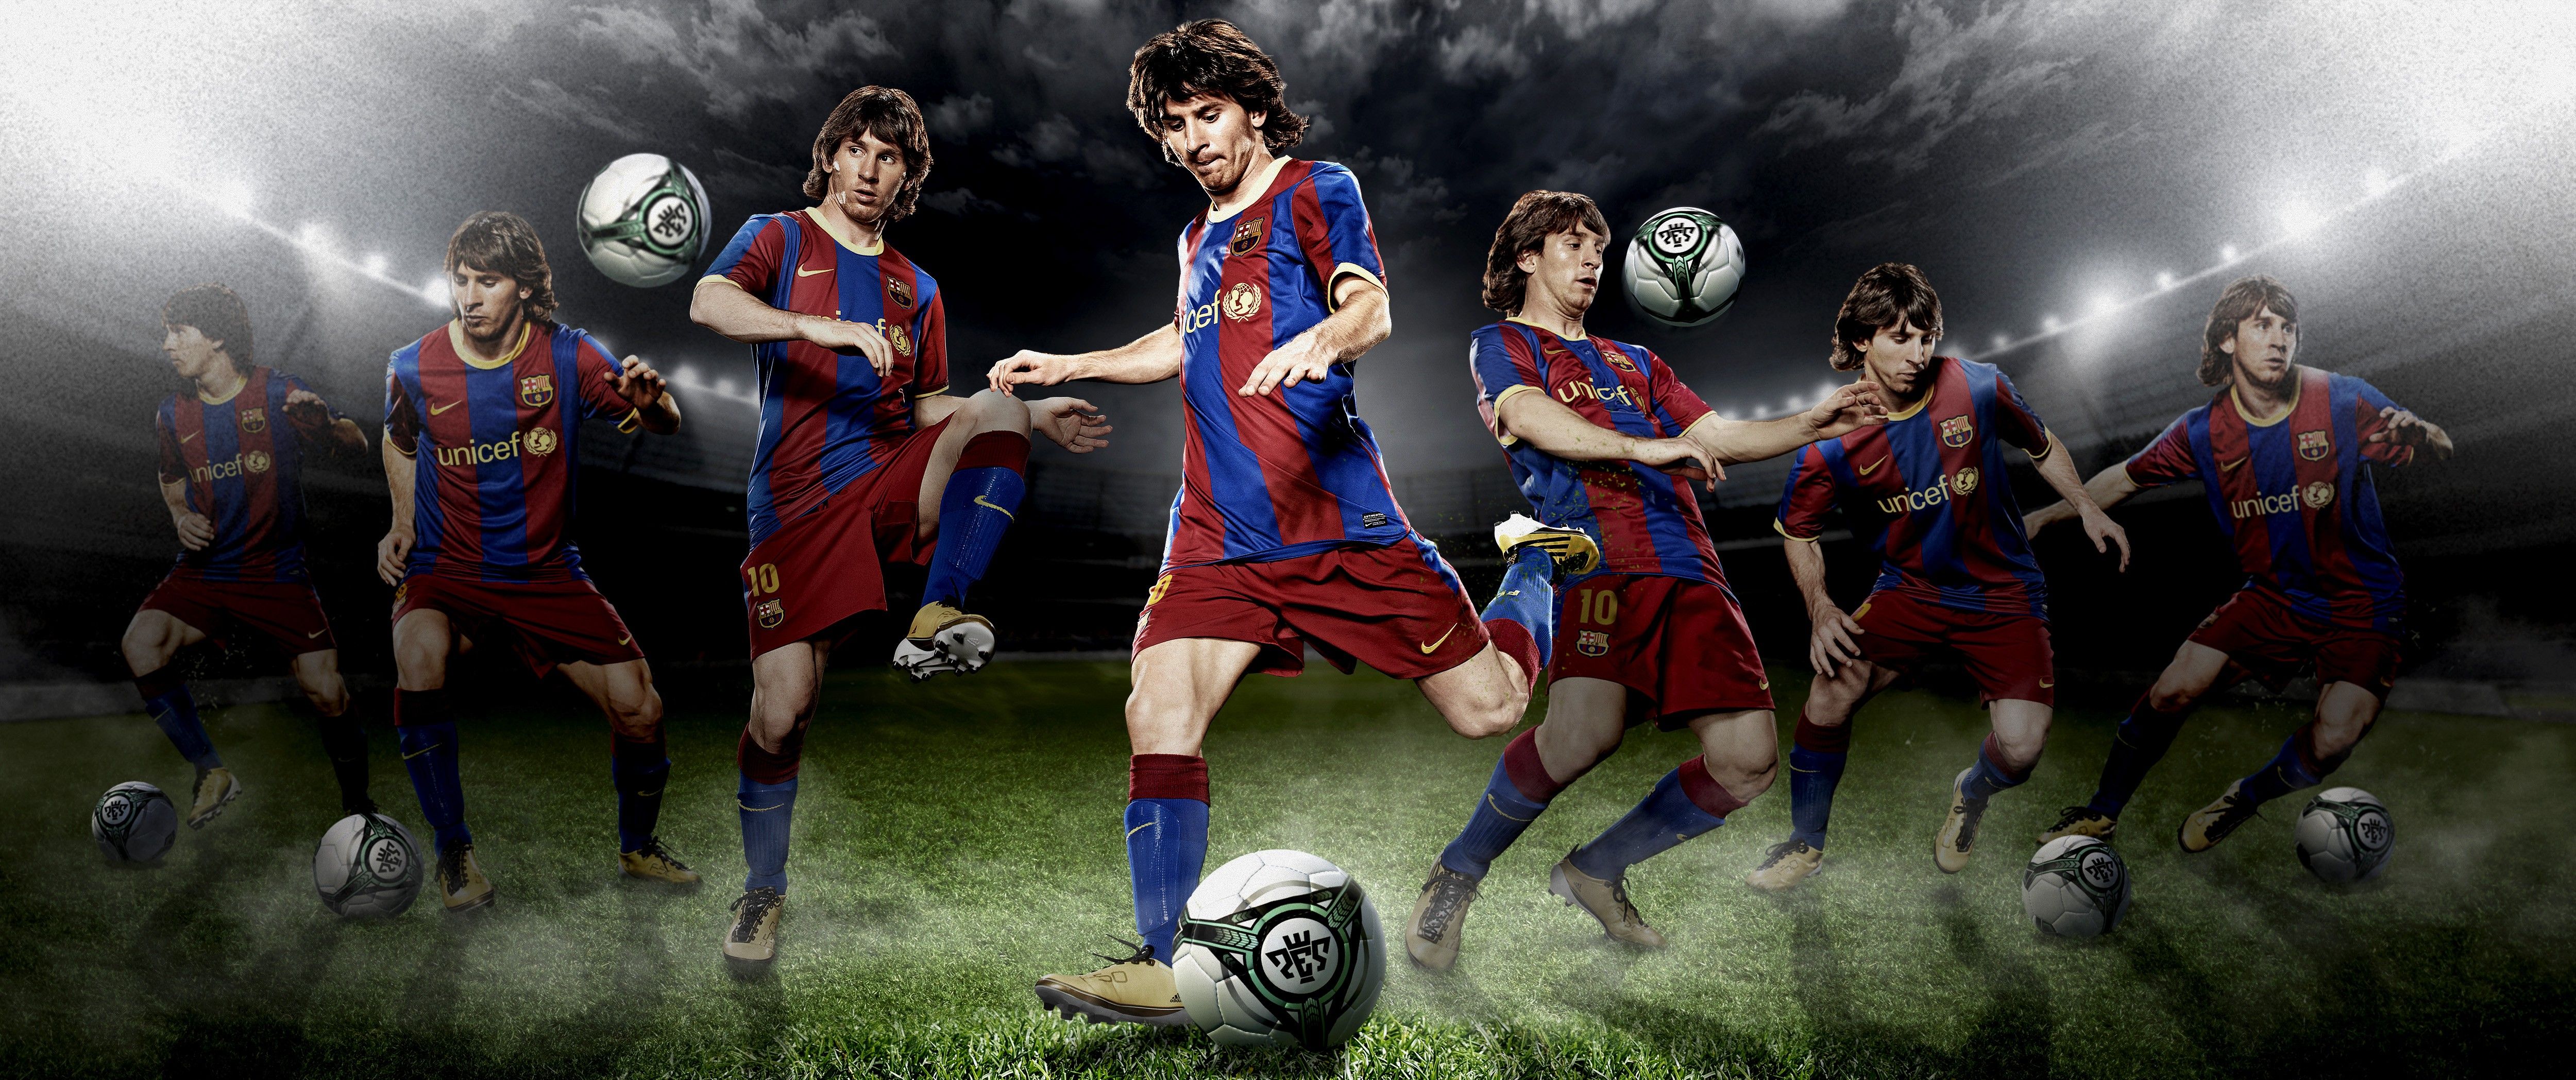 Best Soccer Players Wallpapers Wallpaper Cave